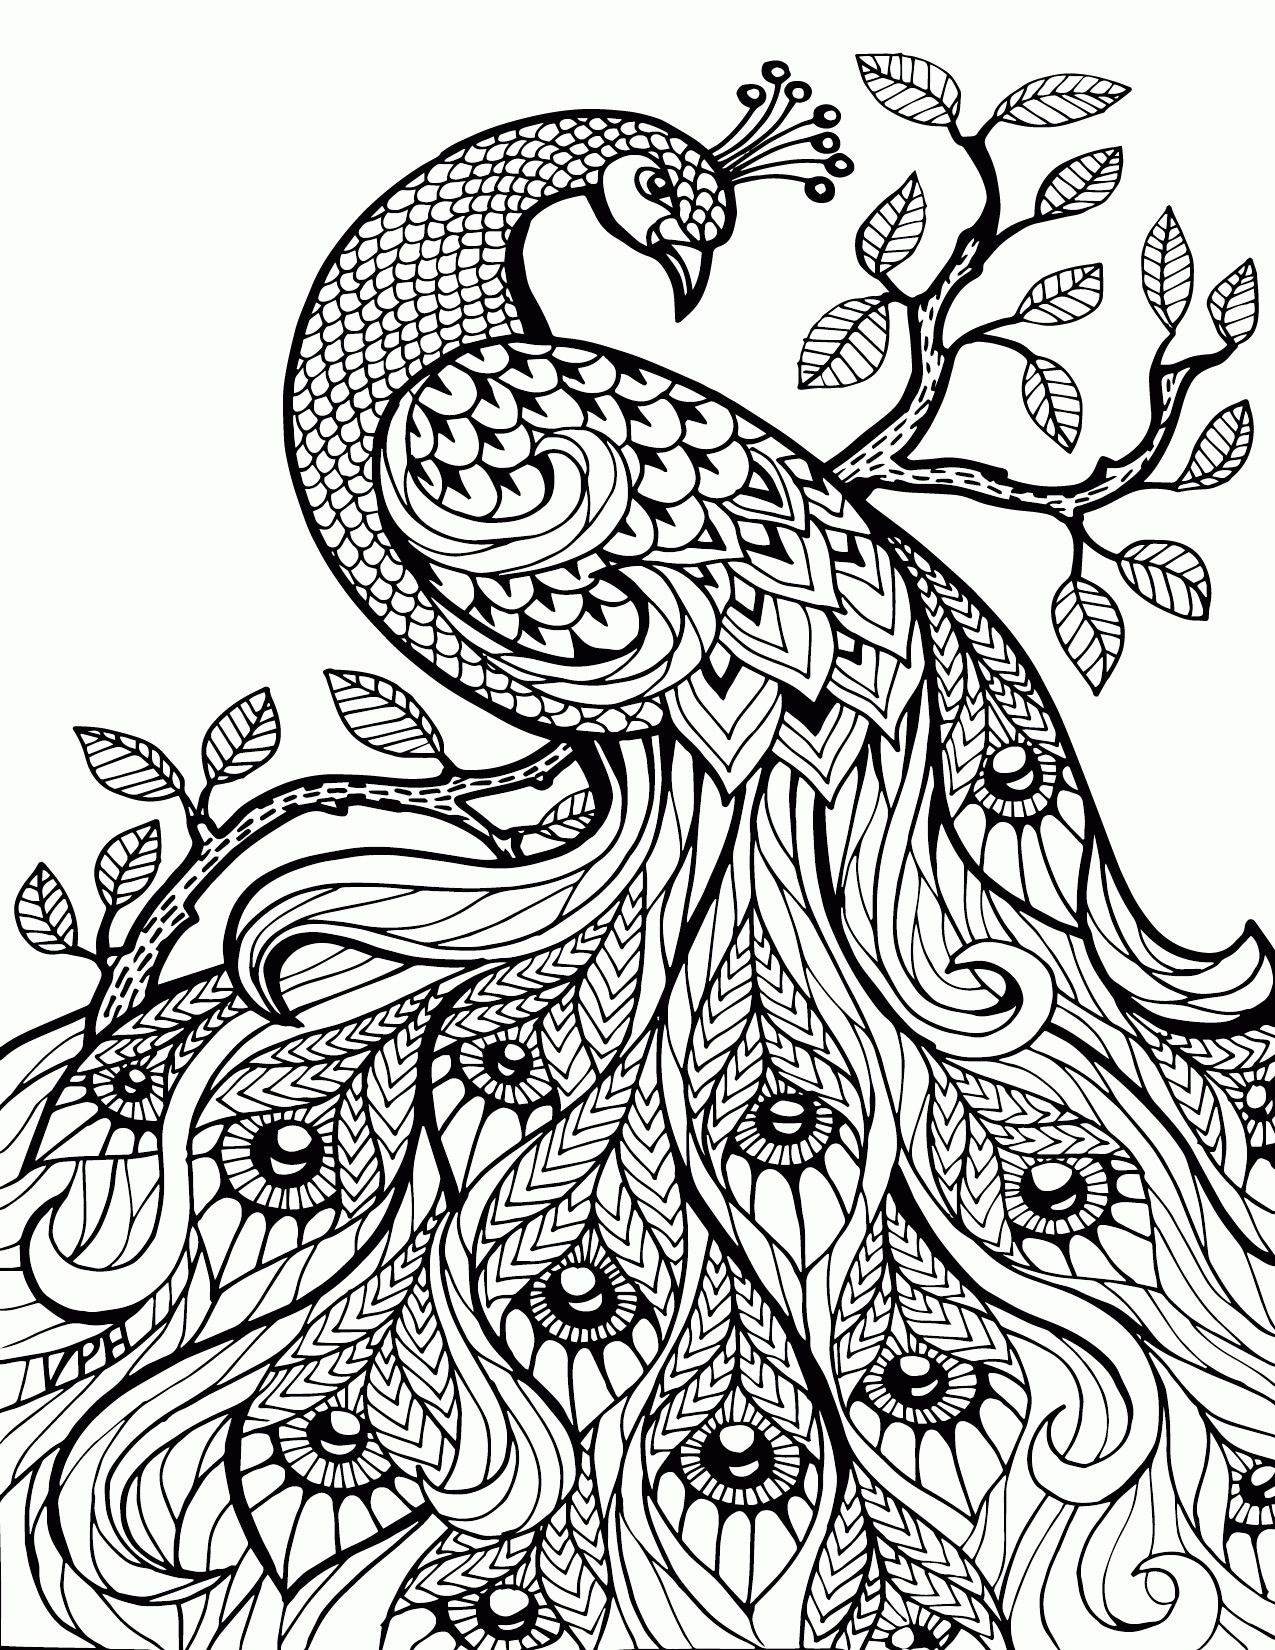 Stress Relief Coloring Book
 Adult Stress Relief Coloring Pages Printable Coloring